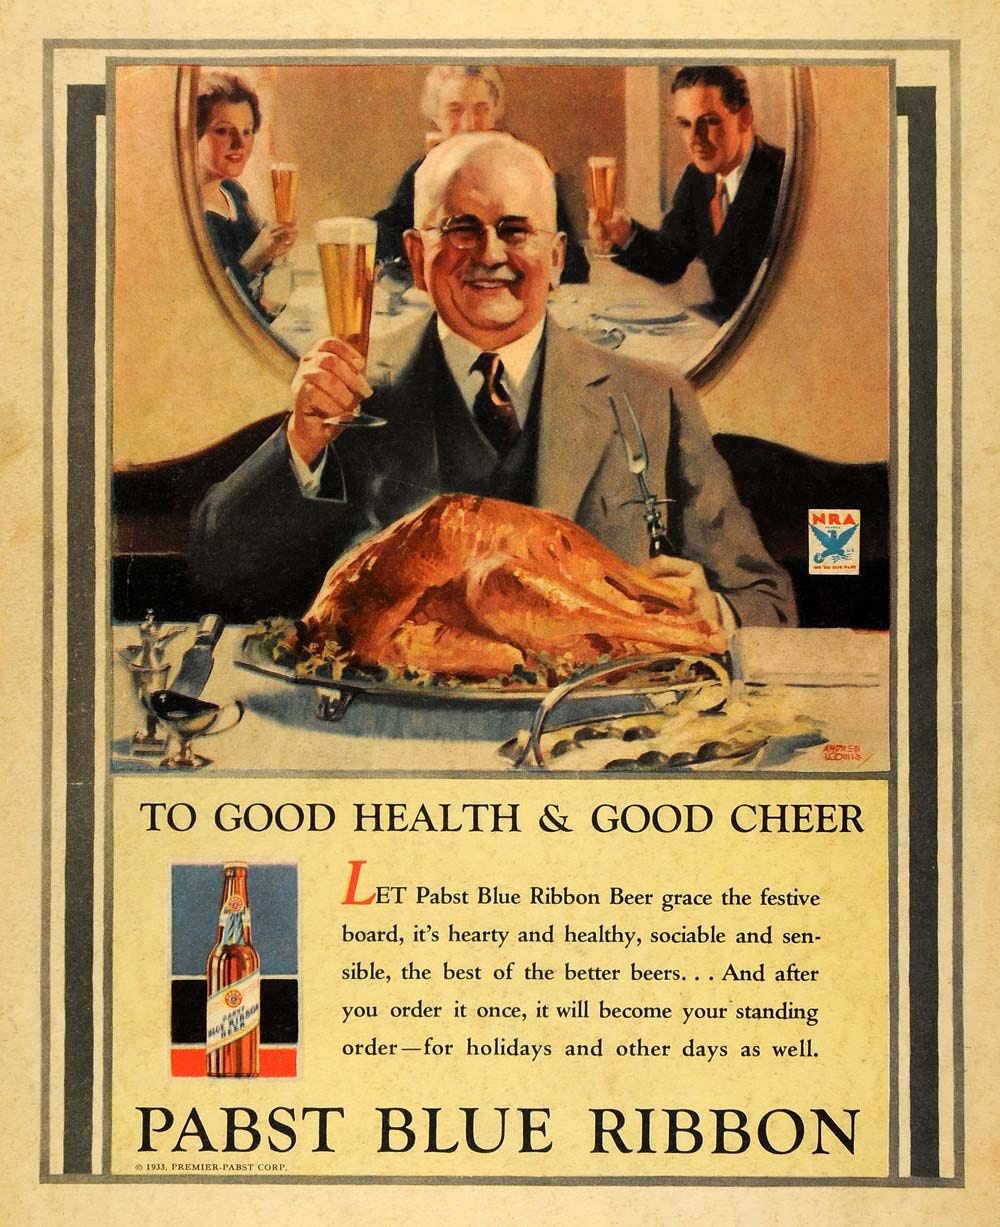 Vintage Thanksgiving Ads Show Us How Things Change, Stay the Same - Coal  Region Canary